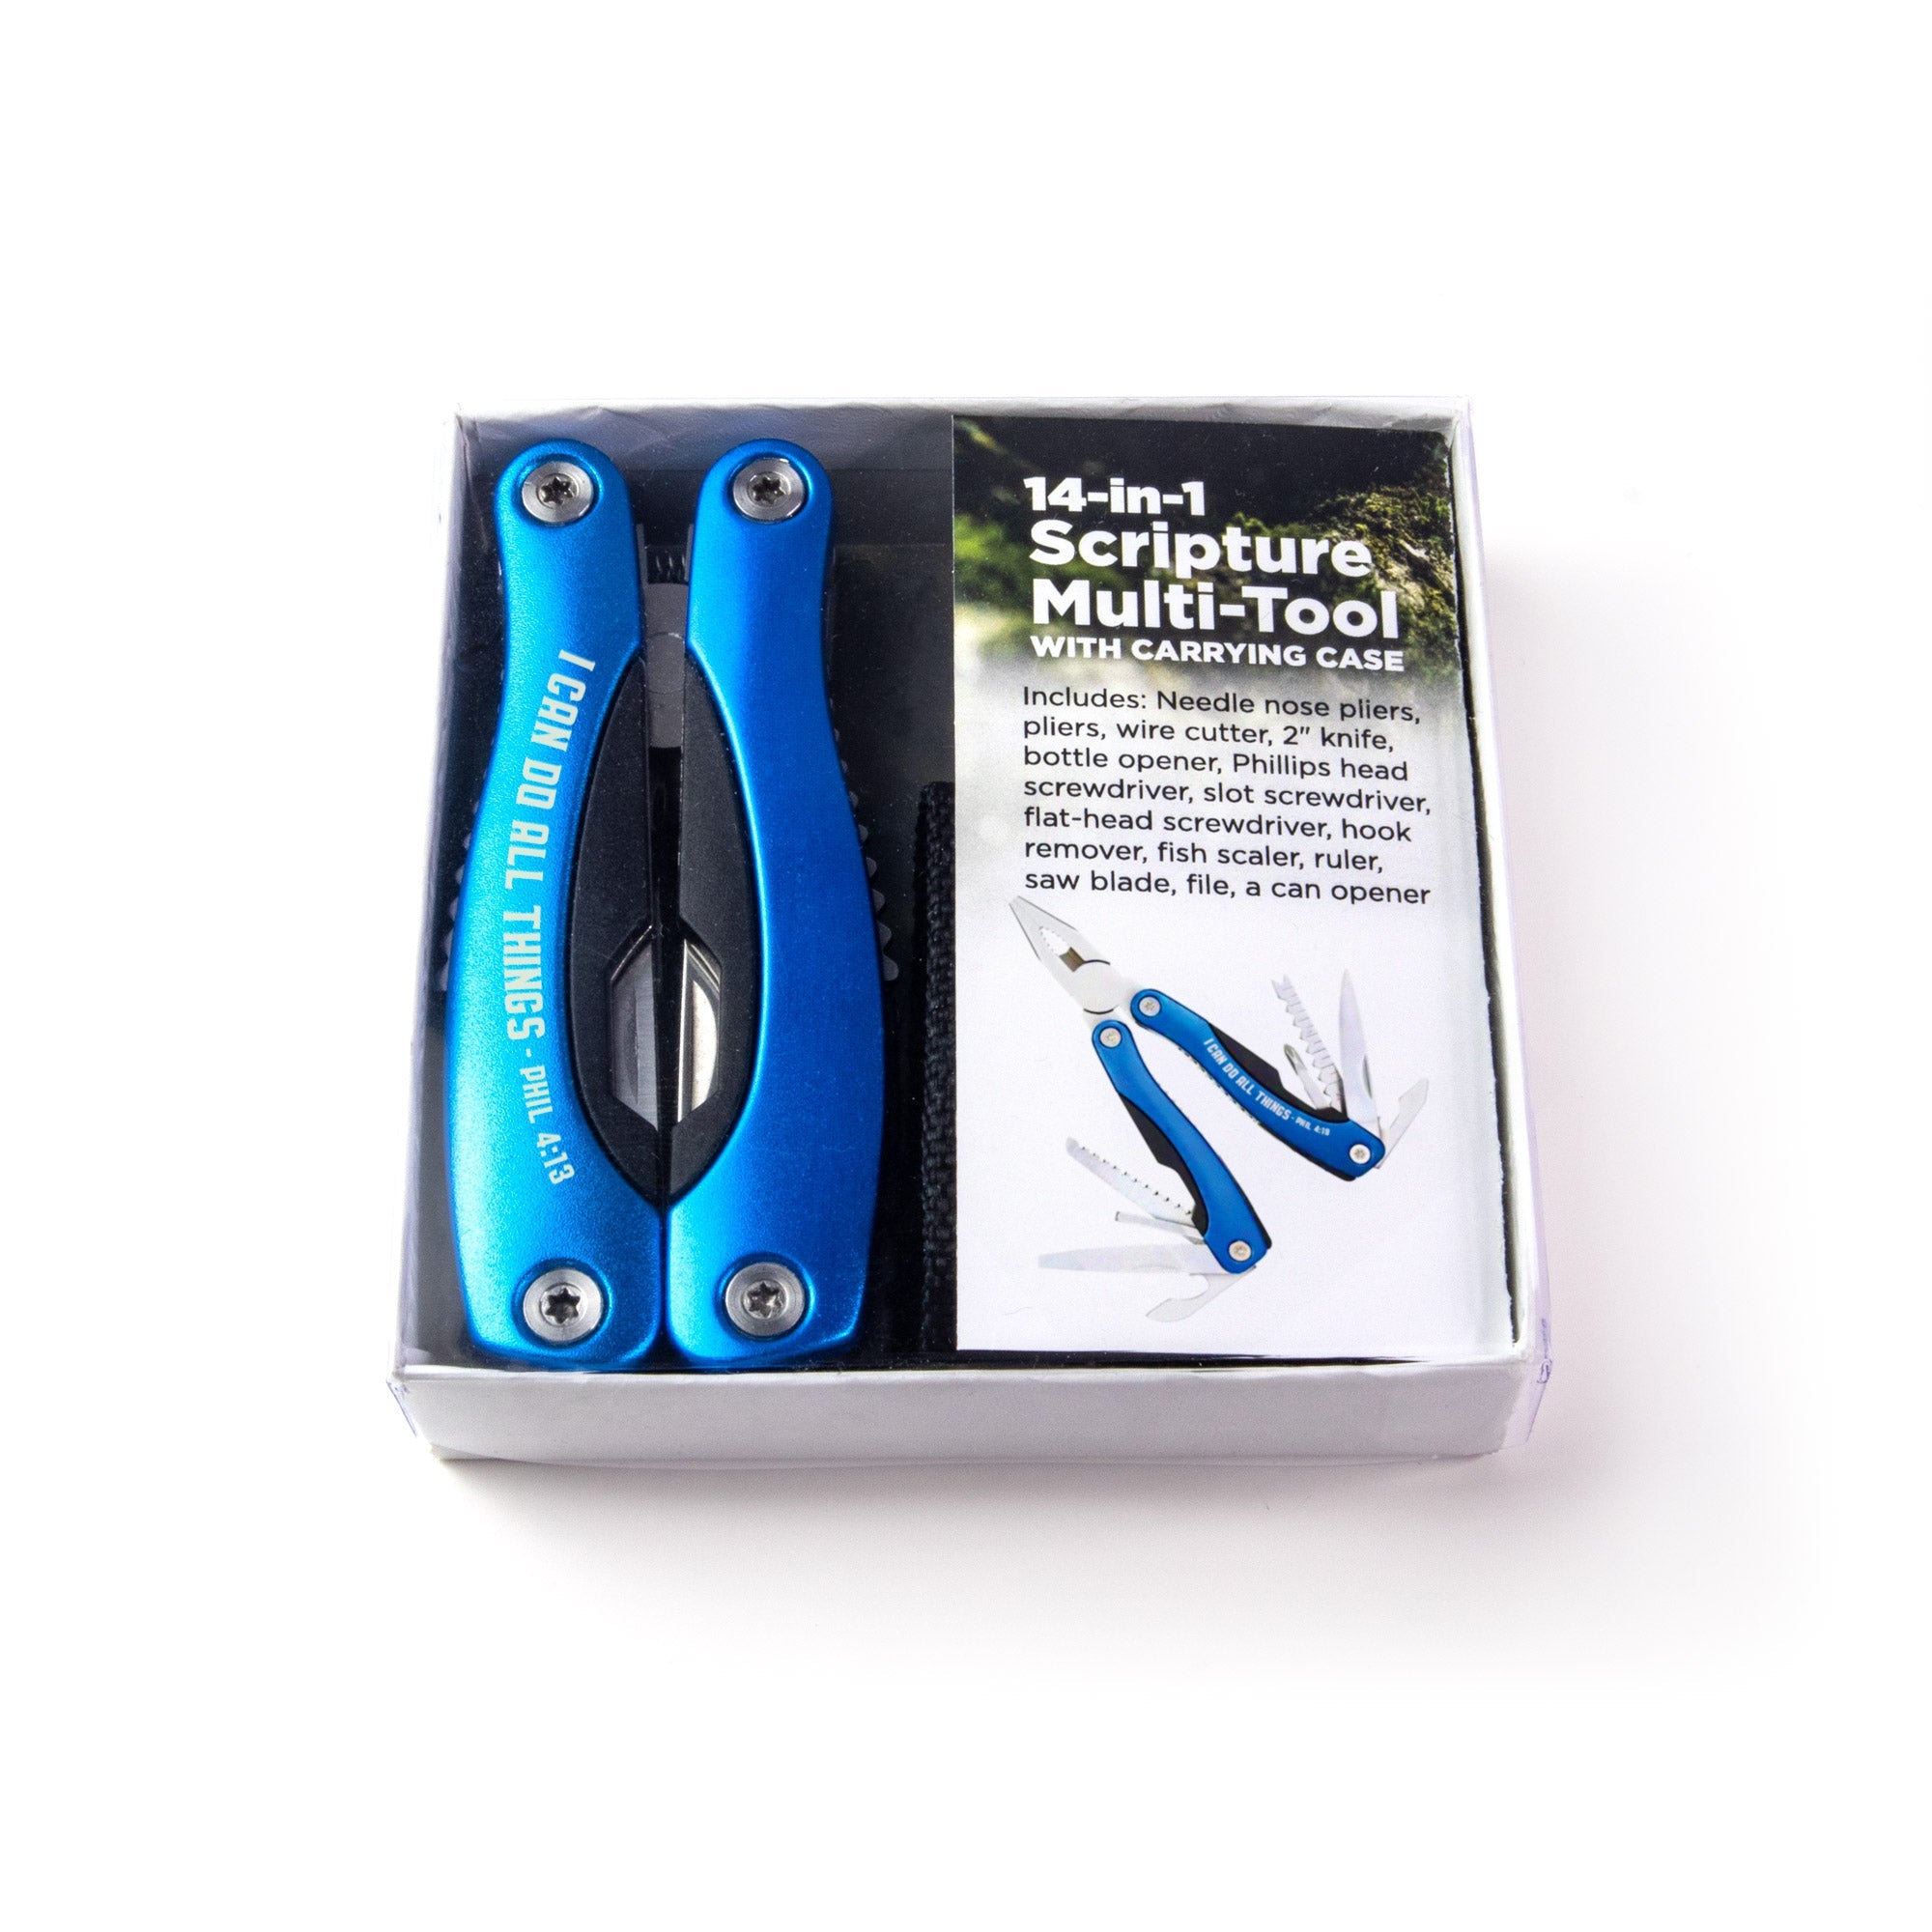 14-in-1 Scripture Multi-Tools - I Can Do All Things: Phil. 4:13